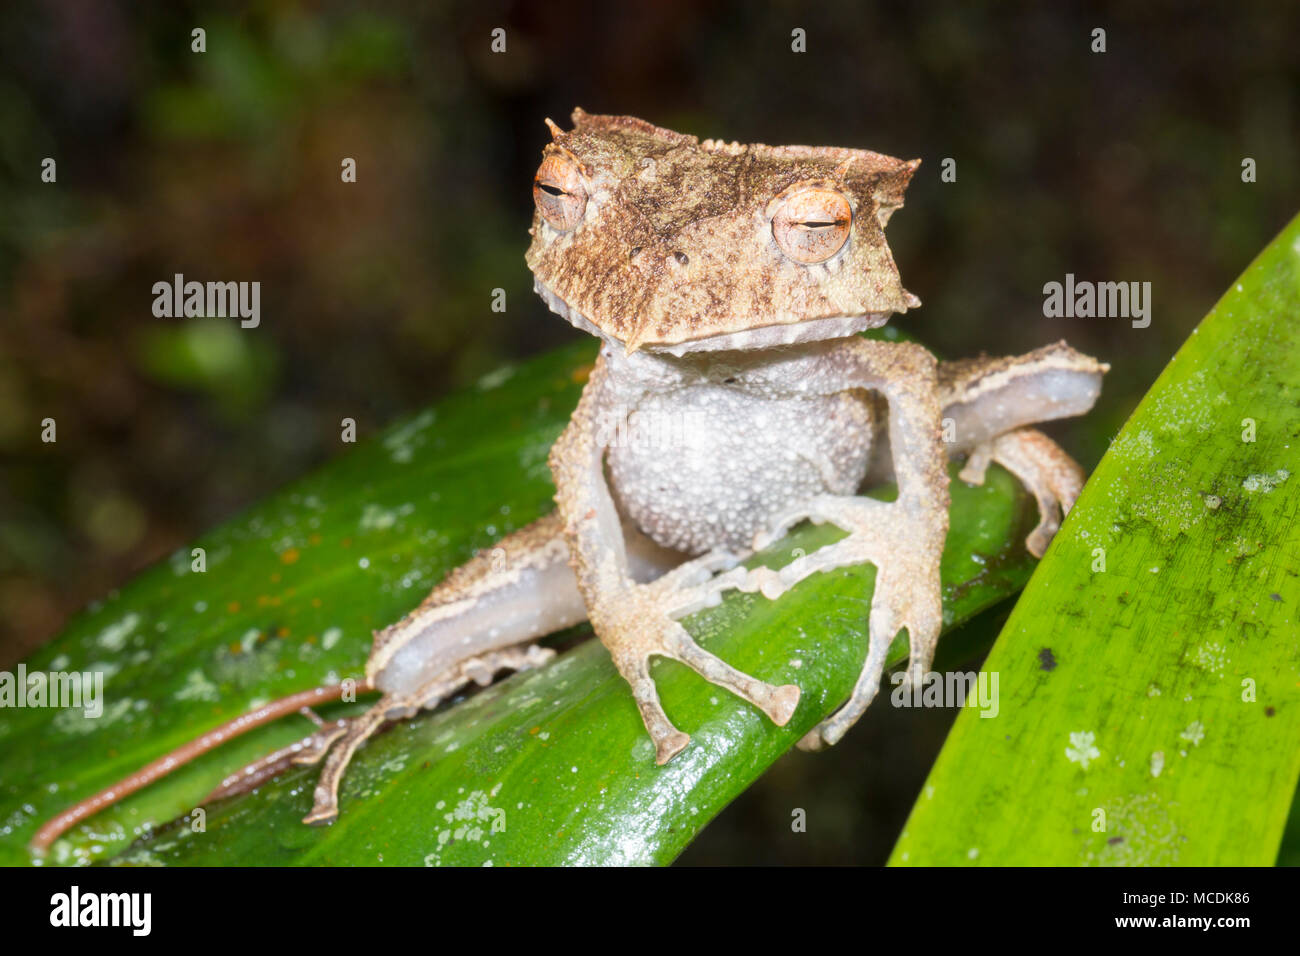 The extremely rare and endangered Ecuador Horned Treefrog (Hemiphractus bubalus). Roosting at night In its natural habitat the rainforest understory,  Stock Photo